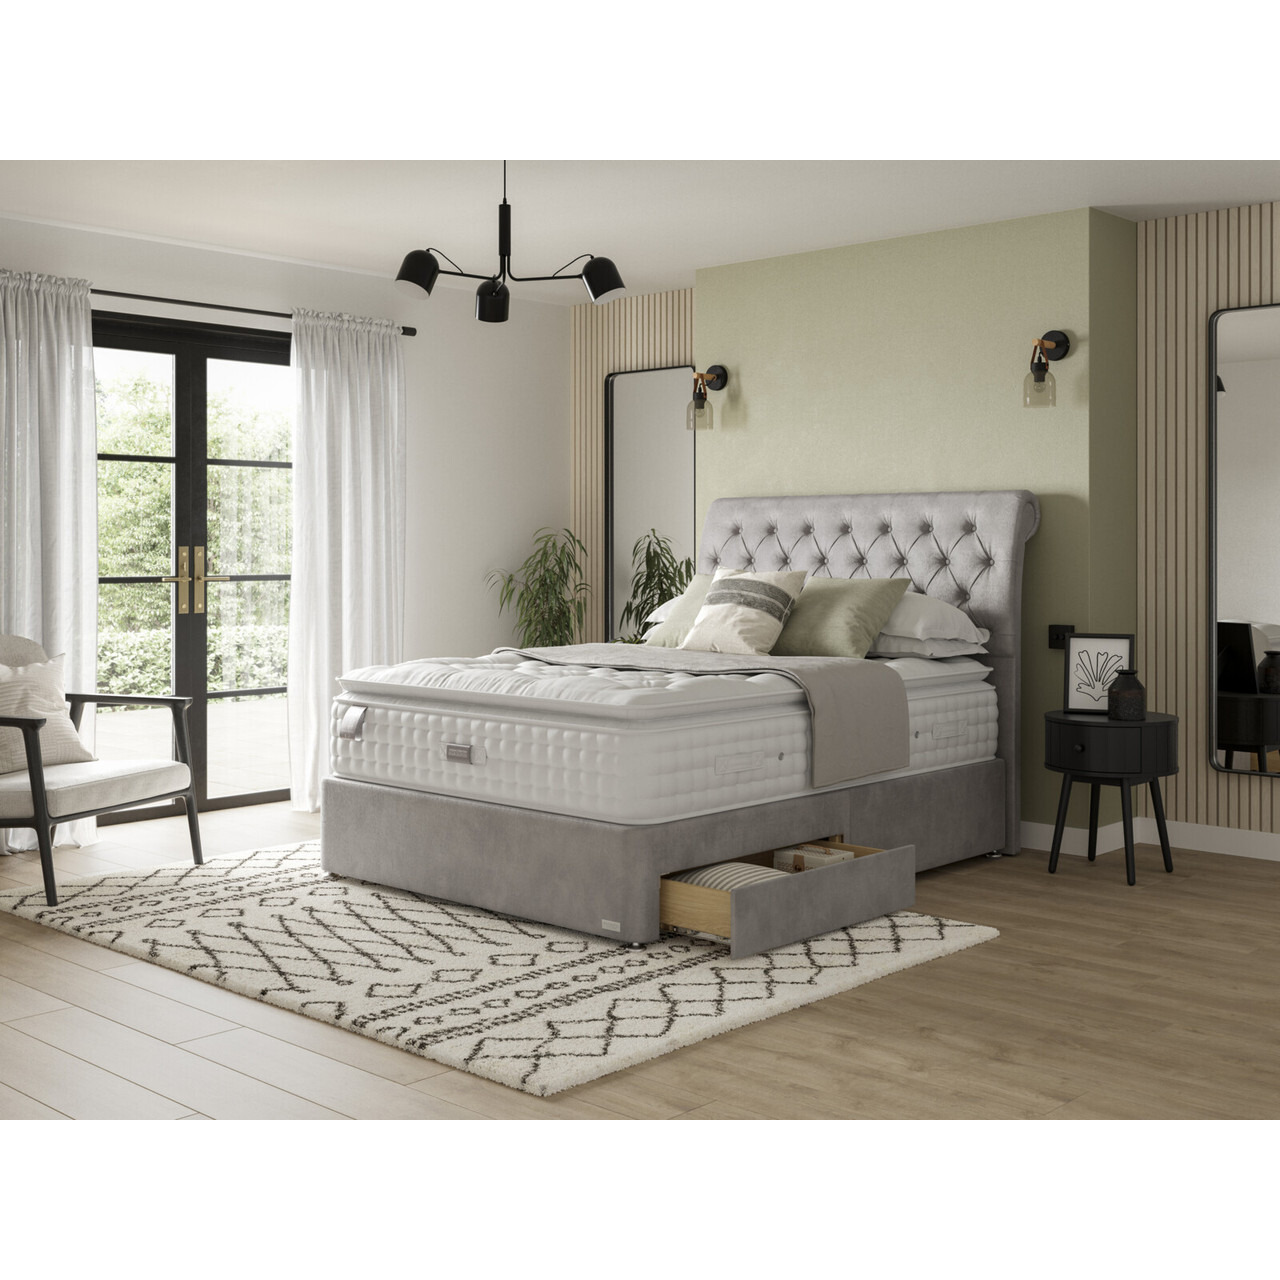 Staples & Co Artisan Deluxe Divan Bed Set On Glides - image 1